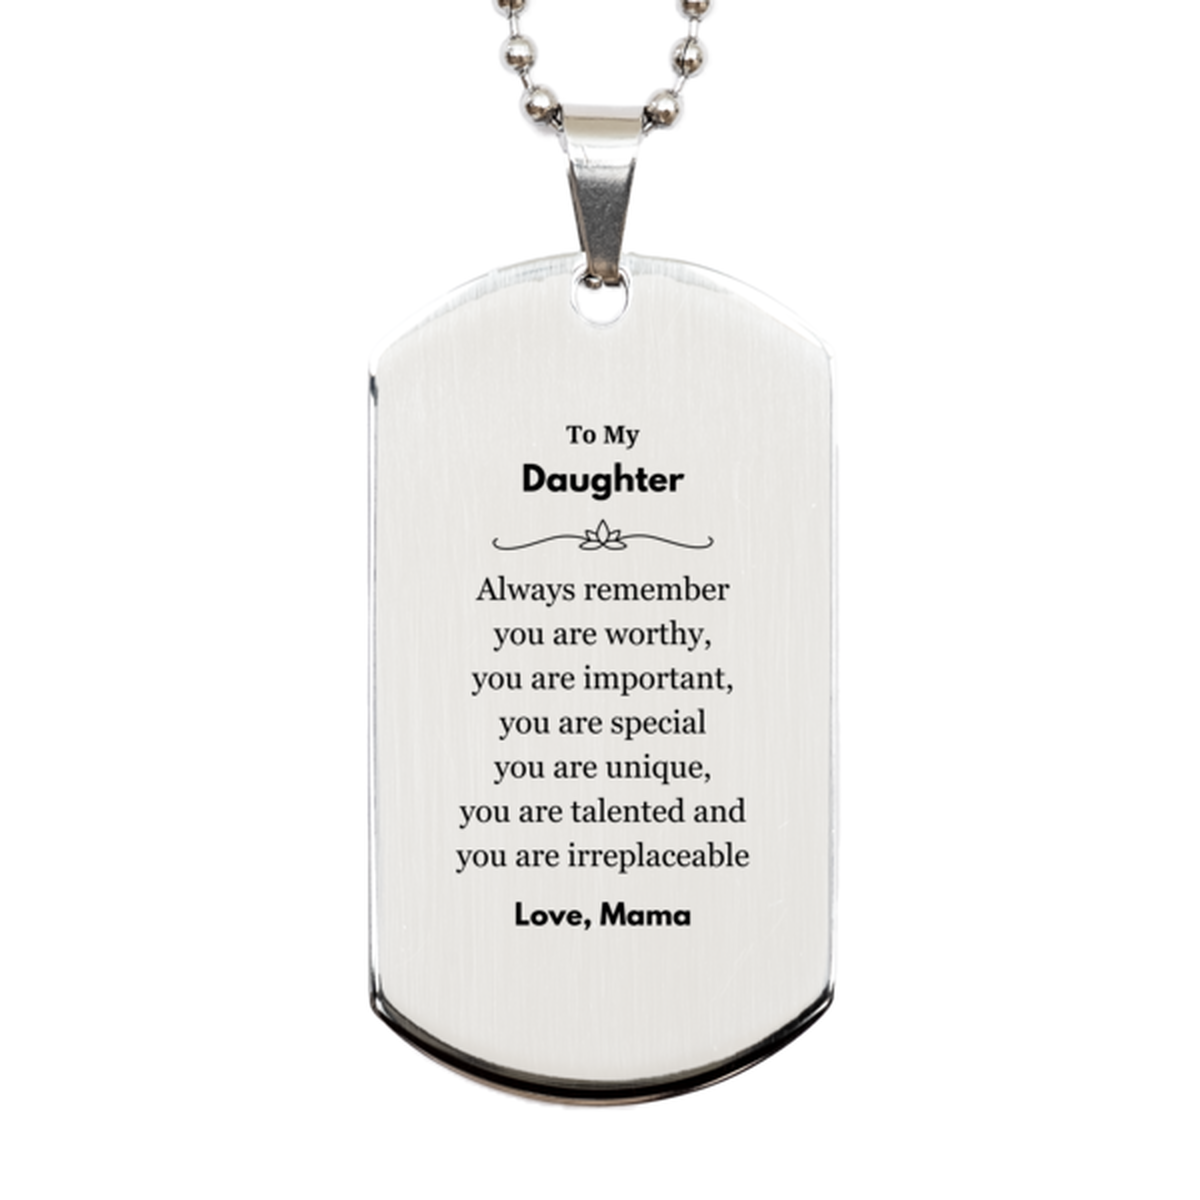 Daughter Birthday Gifts from Mama, Inspirational Silver Dog Tag for Daughter Christmas Graduation Gifts for Daughter Always remember you are worthy, you are important. Love, Mama